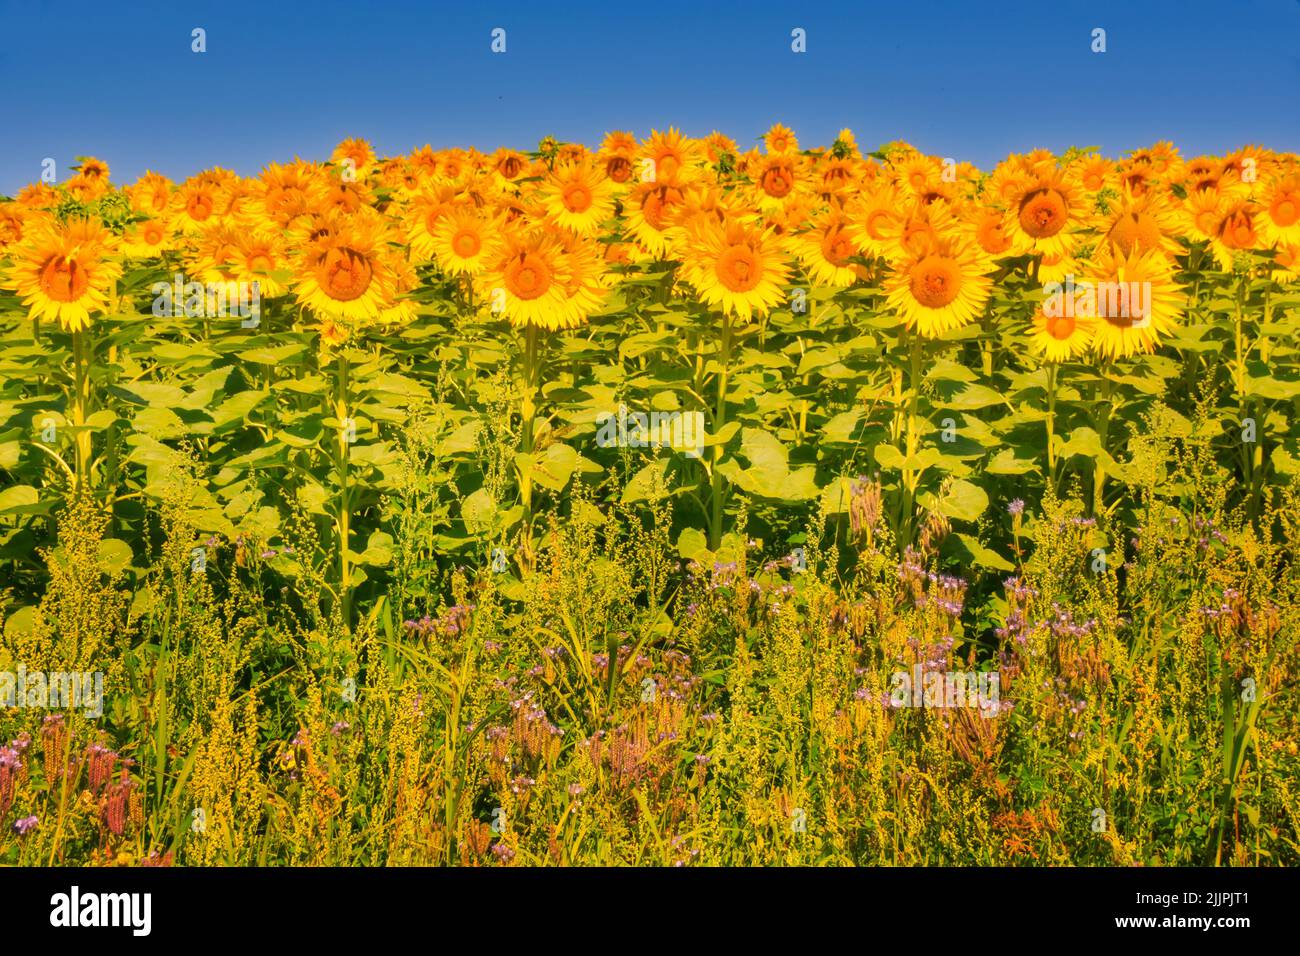 Close-Up of Sunflowers growing in a field, Oberrohrdorf, Aargau, Switzerland Stock Photo